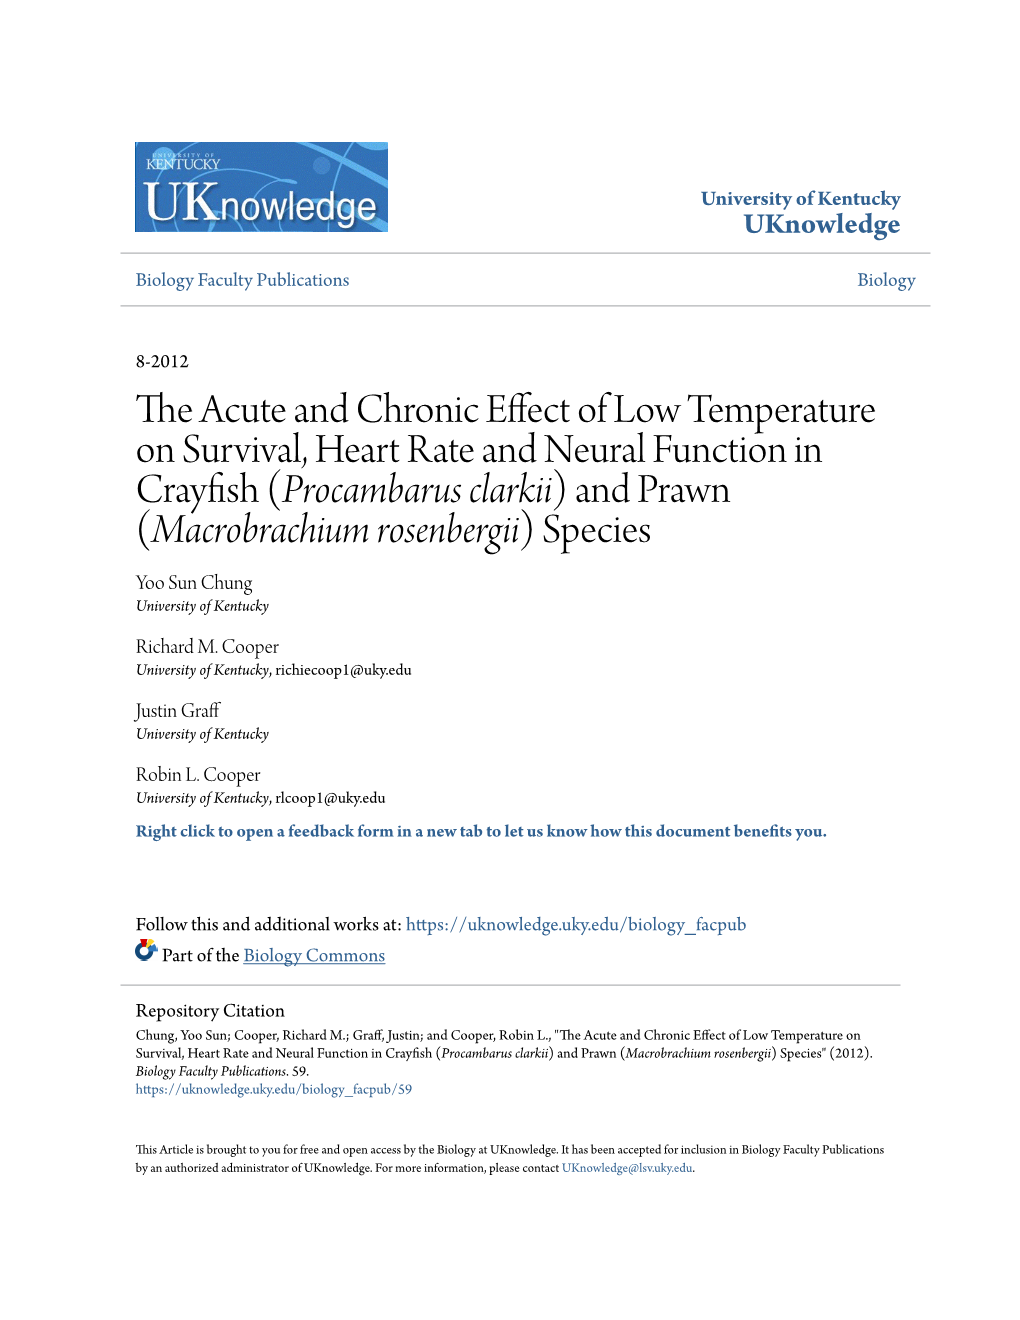 The Acute and Chronic Effect of Low Temperature on Survival, Heart Rate and Neural Function in Crayfish